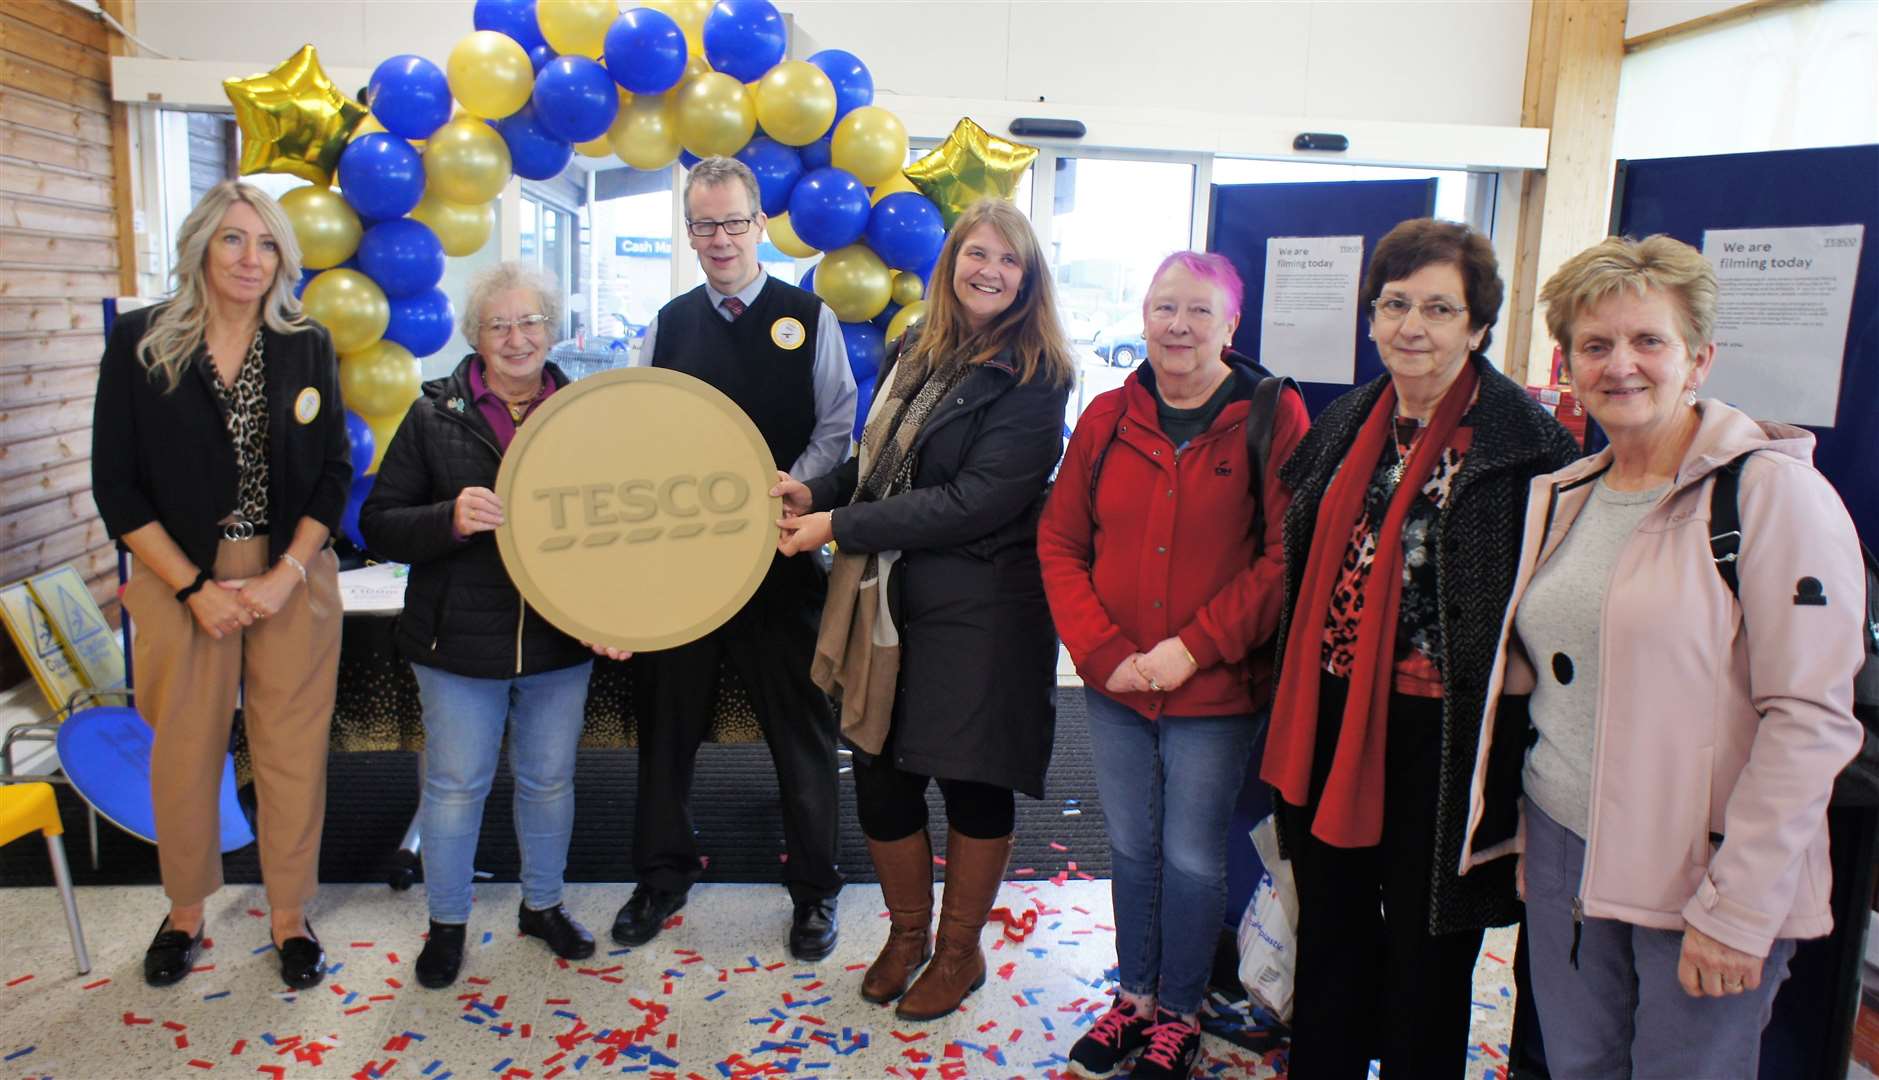 From left, Tesco community champion Karen Center, Jane McCarthy who chose the charity, Tesco fresh lead trade manager Billy Duchart, Jennifer Harvey development officer at PPP along with Norma Craven, Julie Ross and Mary Thain who volunteer at the lunch club. Picture: DGS